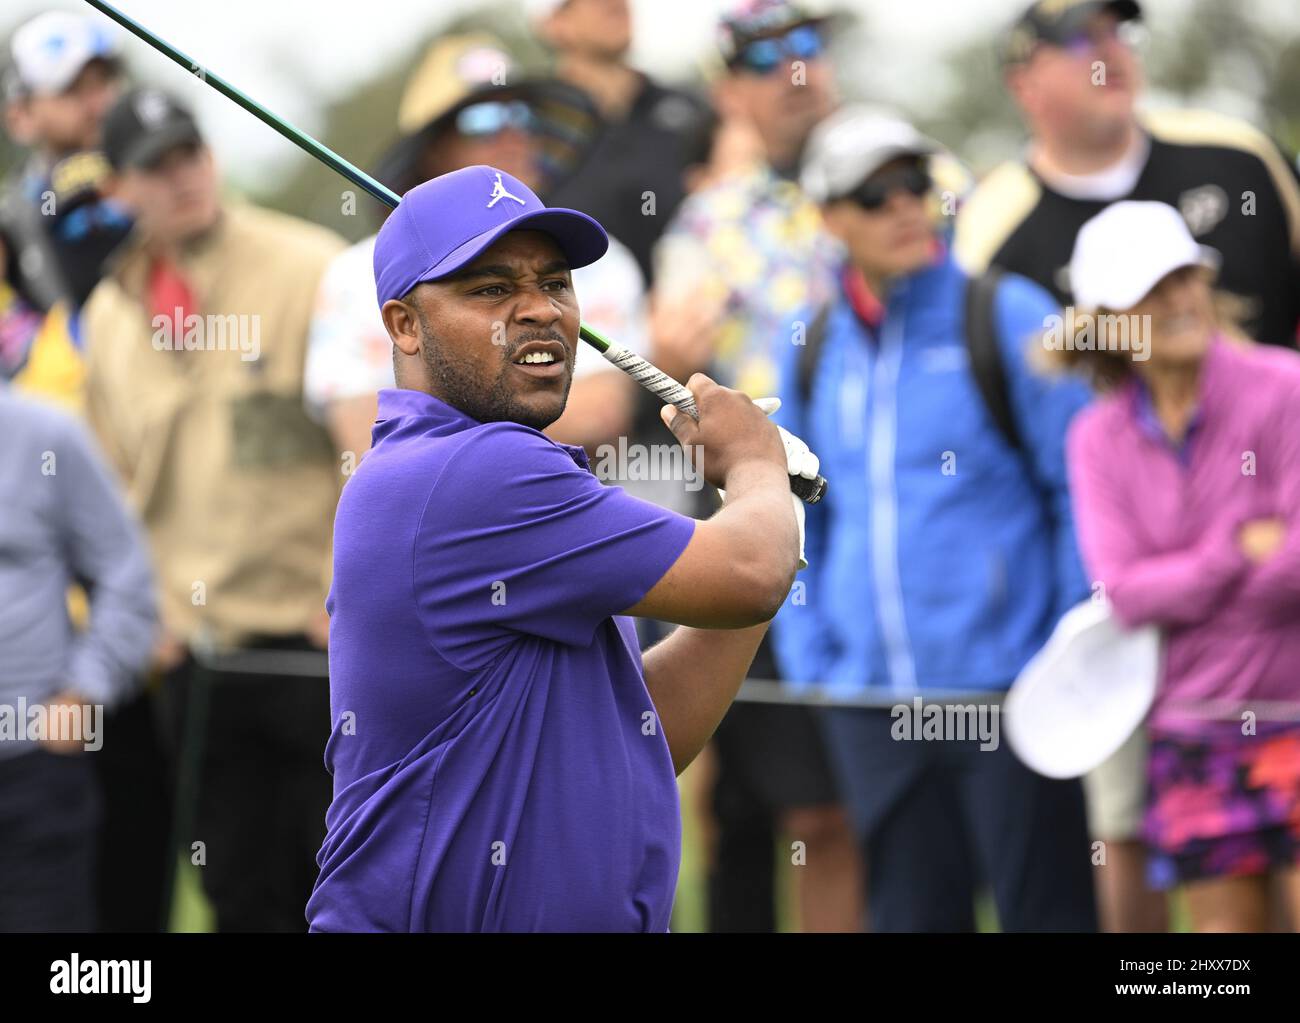 Ponte Vedra Beach, United States. 14th Mar, 2022. Harold Varner III of the United States tees off on the 1st hole in the final round of the 2022 Players PGA Championship on the Stadium Course at TPC Sawgrass in Ponte Vedra Beach, Florida on Monday, March 14, 2022. The golf tournament has been extended one day due to weather delays. Photo by Joe Marino/UPI Credit: UPI/Alamy Live News Stock Photo